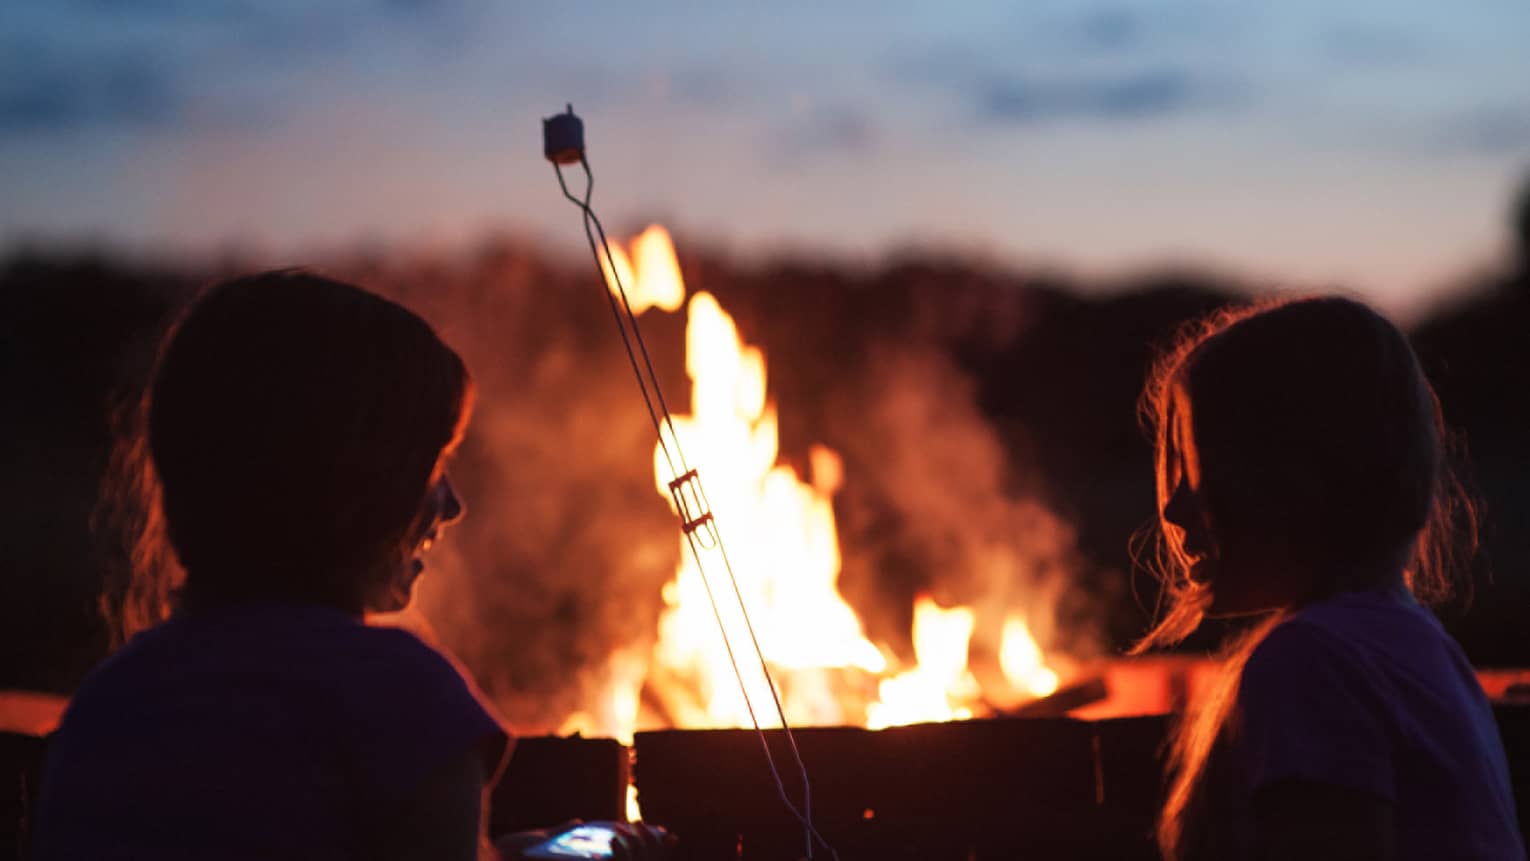 Silhouette of two children roasting marshmallows in front of roaring bonfire 